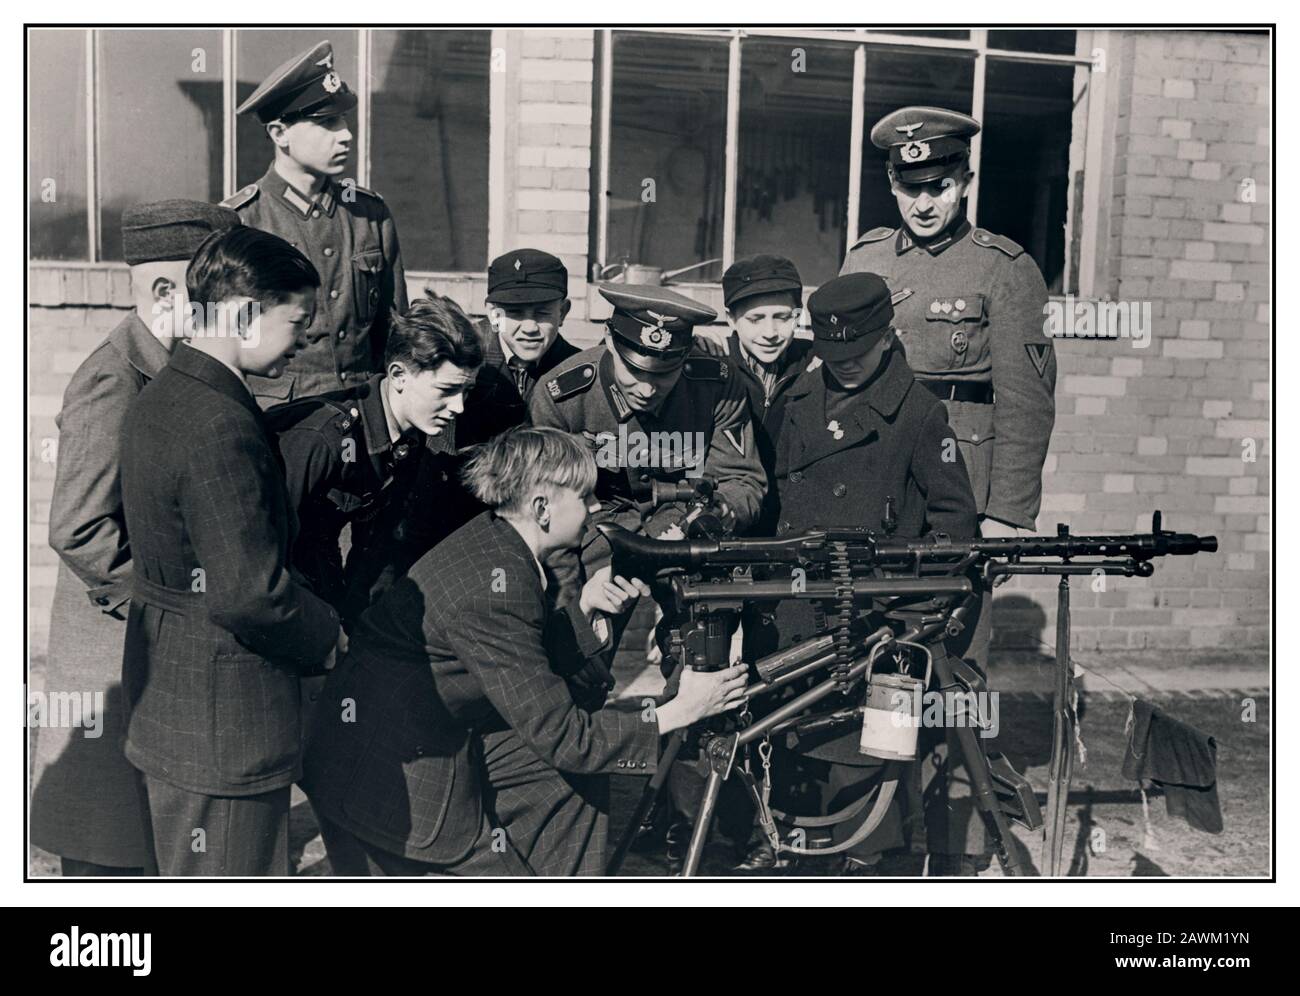 Vintage WW2 1940’s German Nazi Wehrmacht officers teach and train German Hitler Youth boys, the Hitlerjugend, the youth movement of the Nazi Party, how to operate a MG-34 machine gun to enable its members to fight faithfully for Nazi Germany as soldiers.1942. World War II Second World War Stock Photo